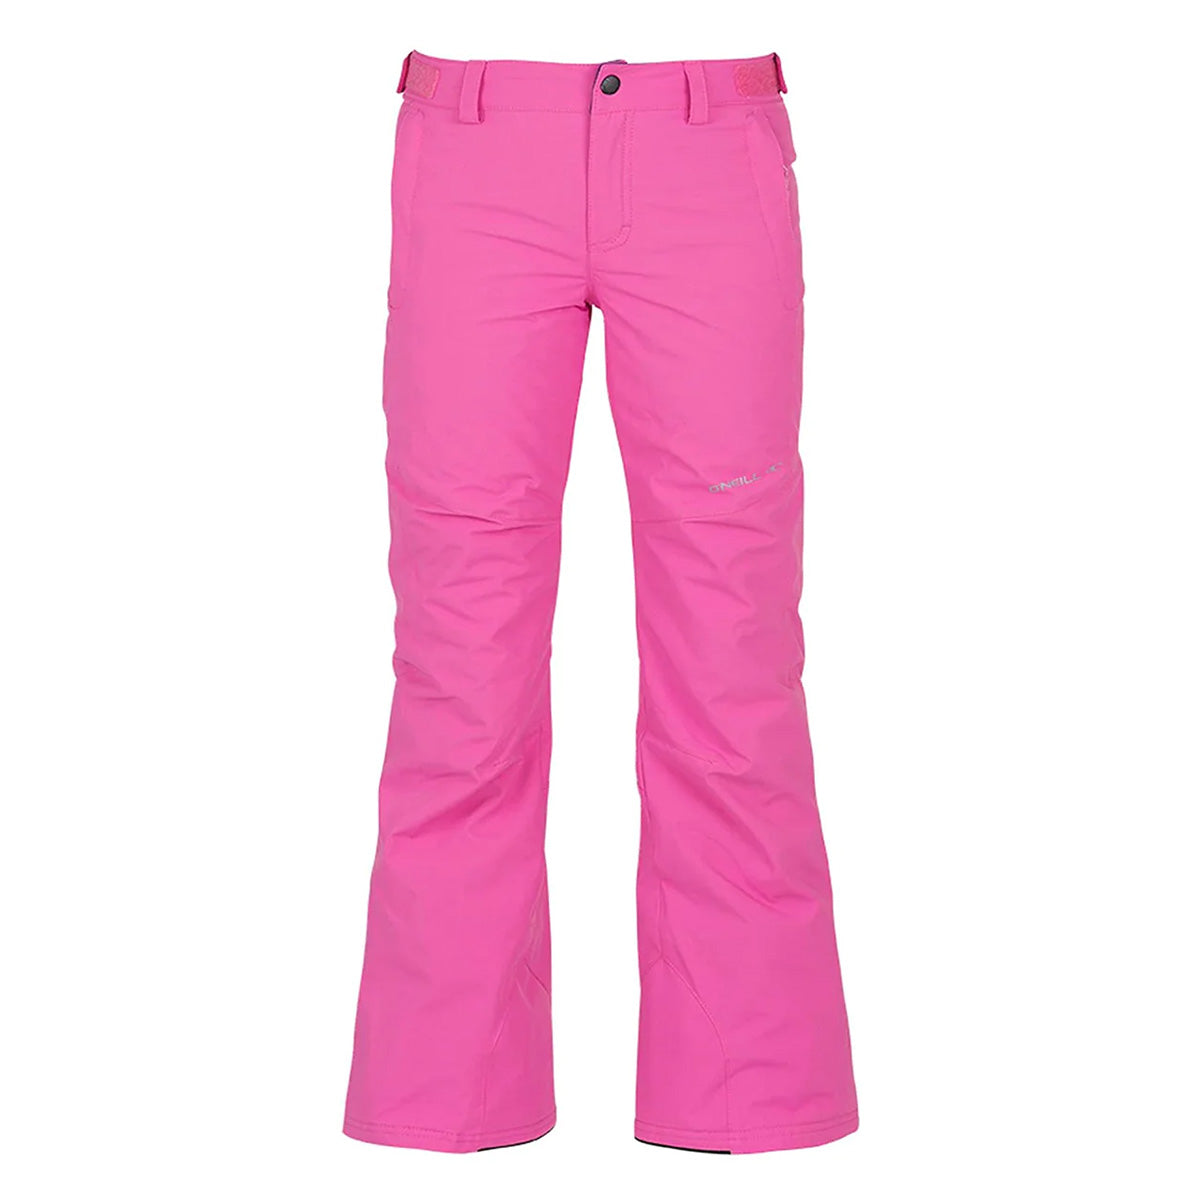 O'Neill Charm Youth Girls Snow Pants